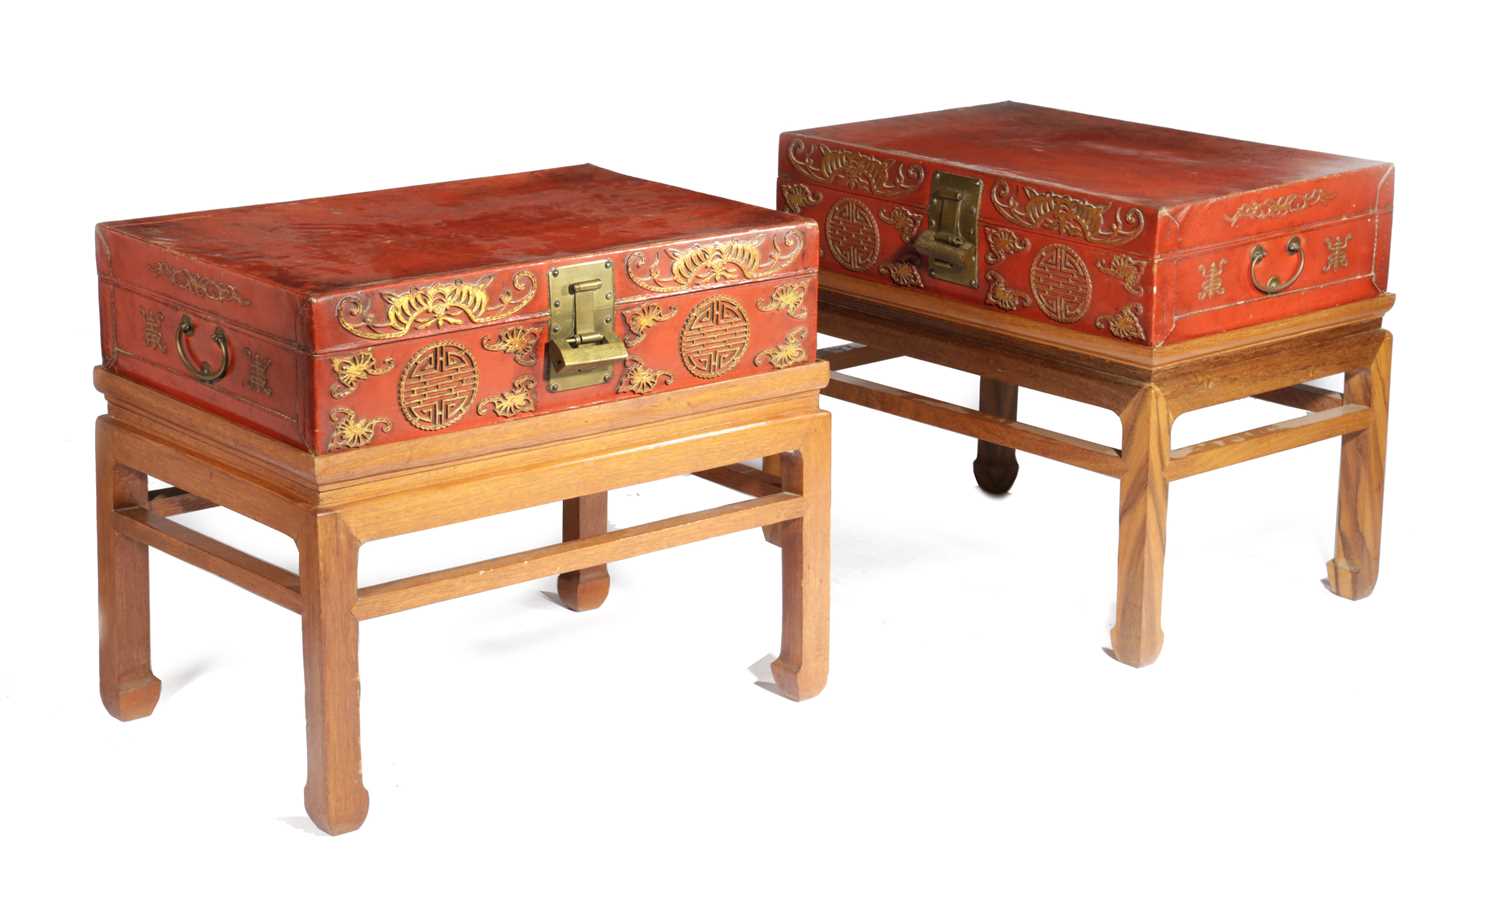 A PAIR OF CHINESE RED VELLUM CASES LATE 19TH / EARLY 20TH CENTURY each gilt decorated with - Image 2 of 2